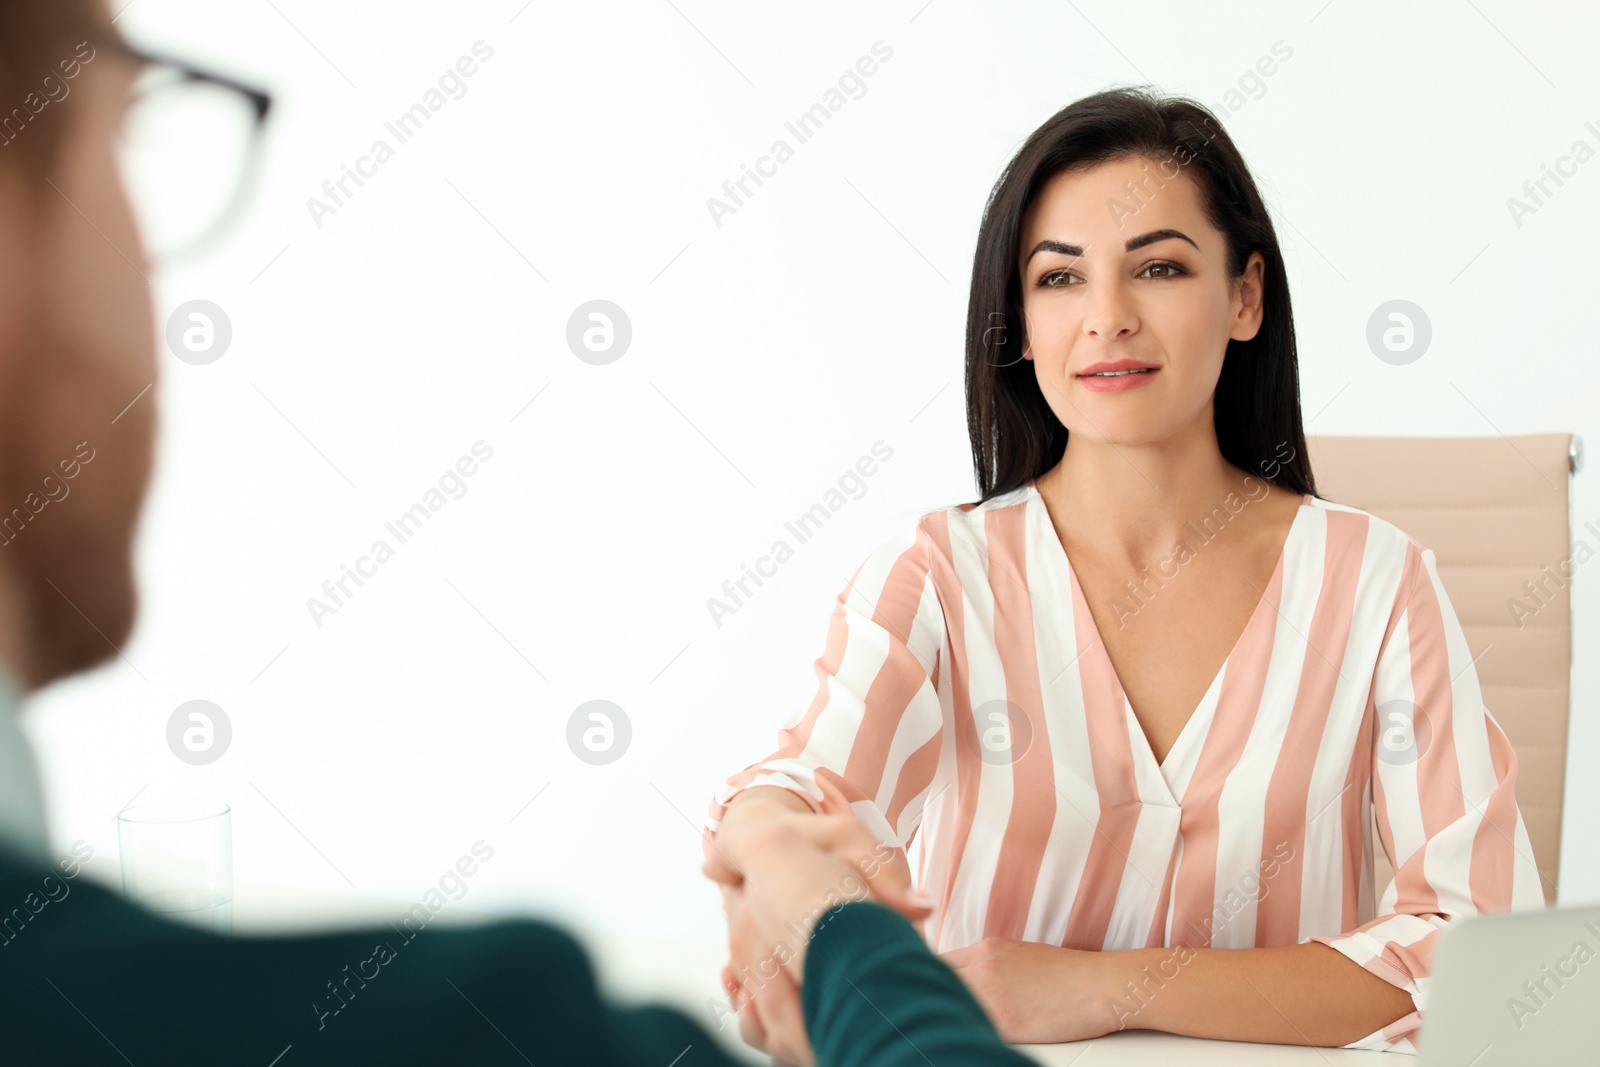 Photo of Human resources manager shaking hands with applicant during job interview in office. Space for text